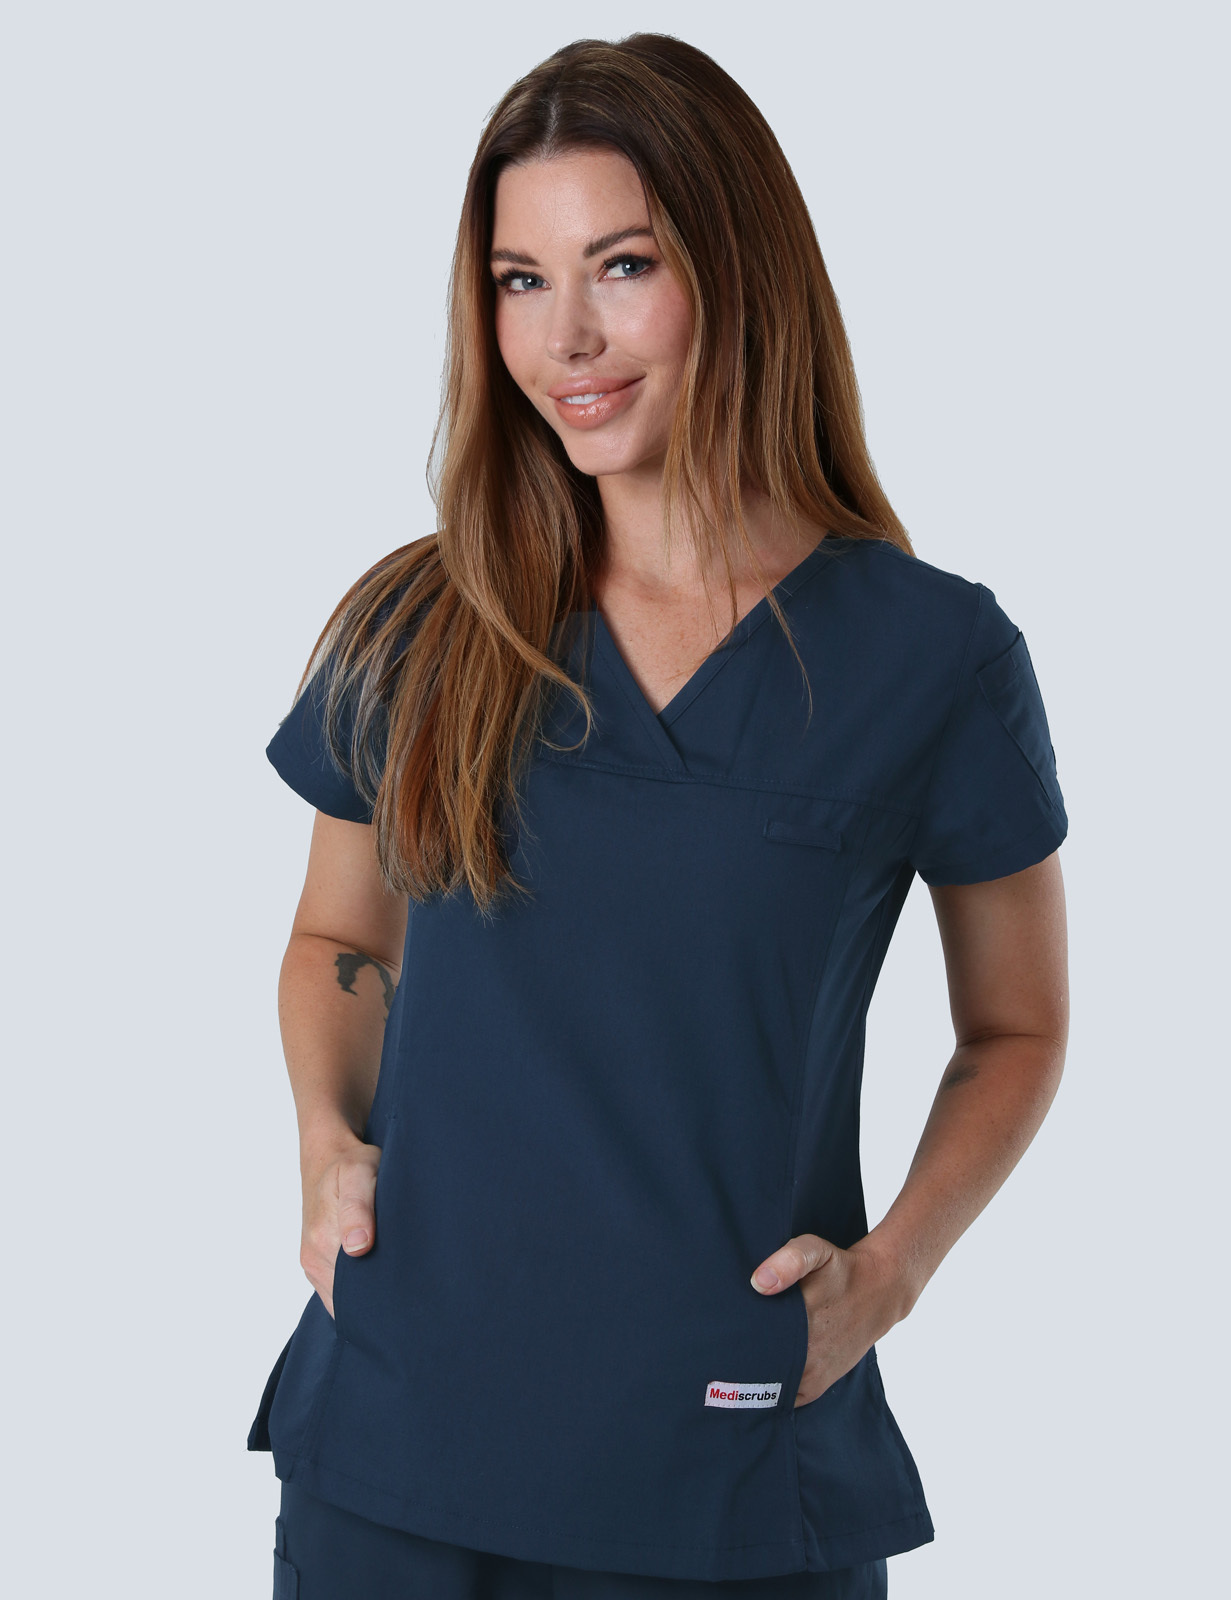 The Angliss Hospital - MI (Women's Fit Solid Scrub Top and Cargo Pants in Navy incl Logos)